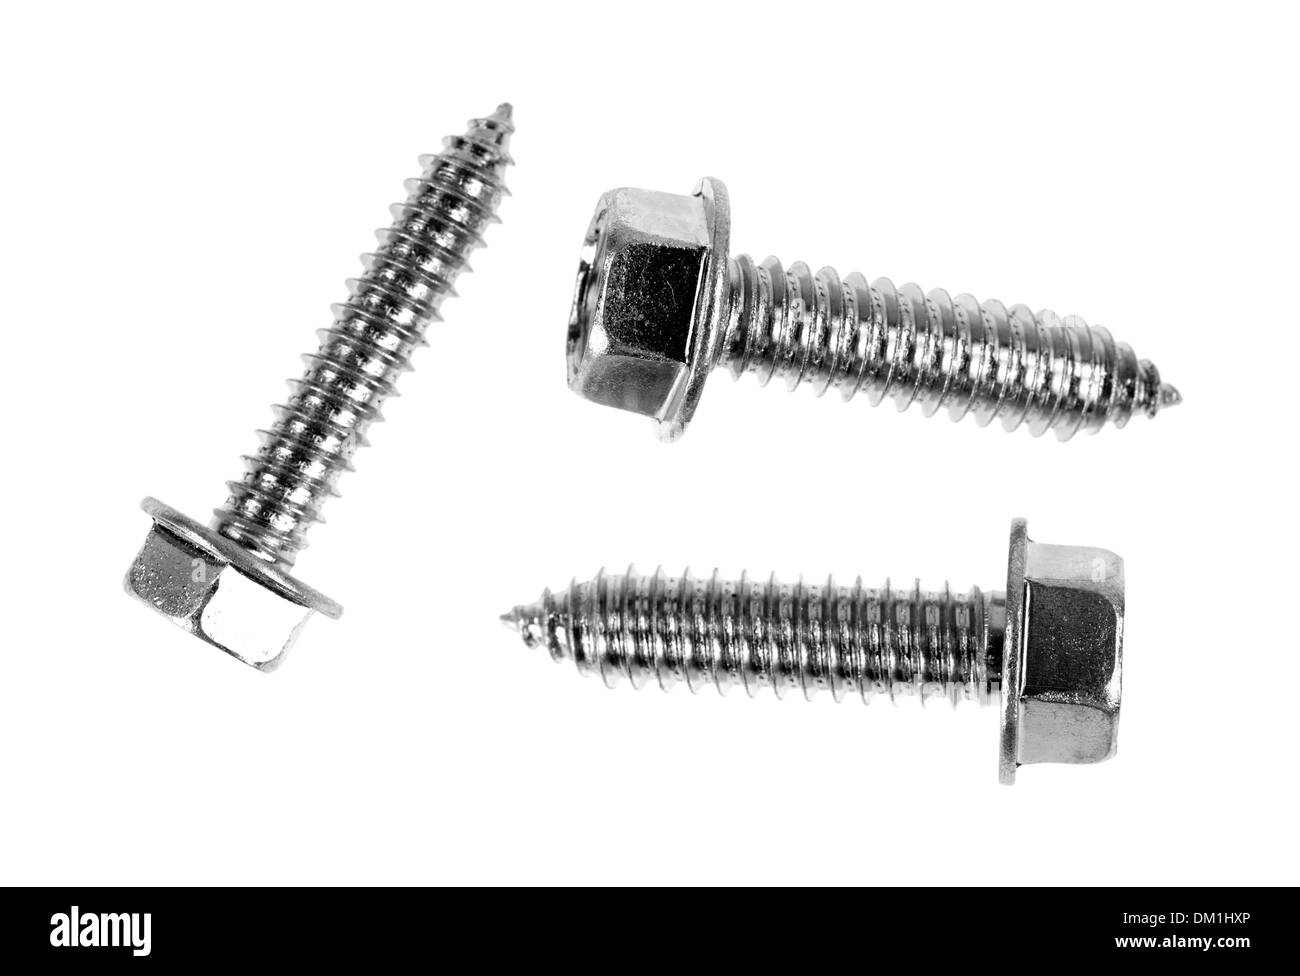 A group of three hex head cutting screws on a white background. Stock Photo